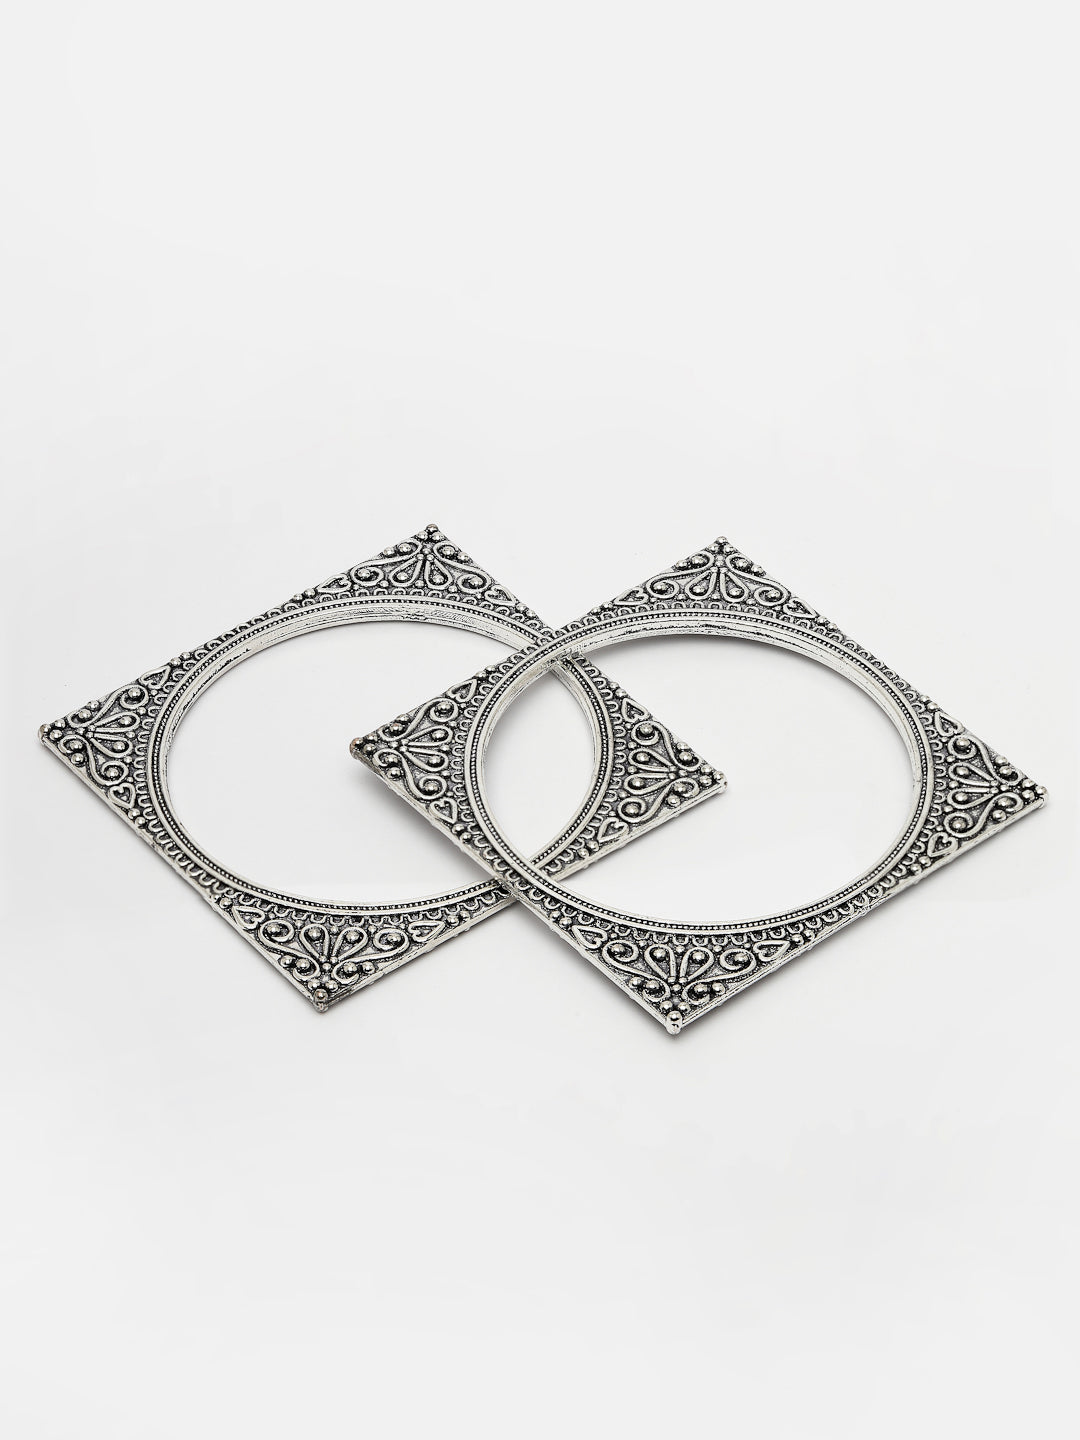 Women's Set Of 2 Silver-Toned Oxidized Square Shaped Bangles - Nvr